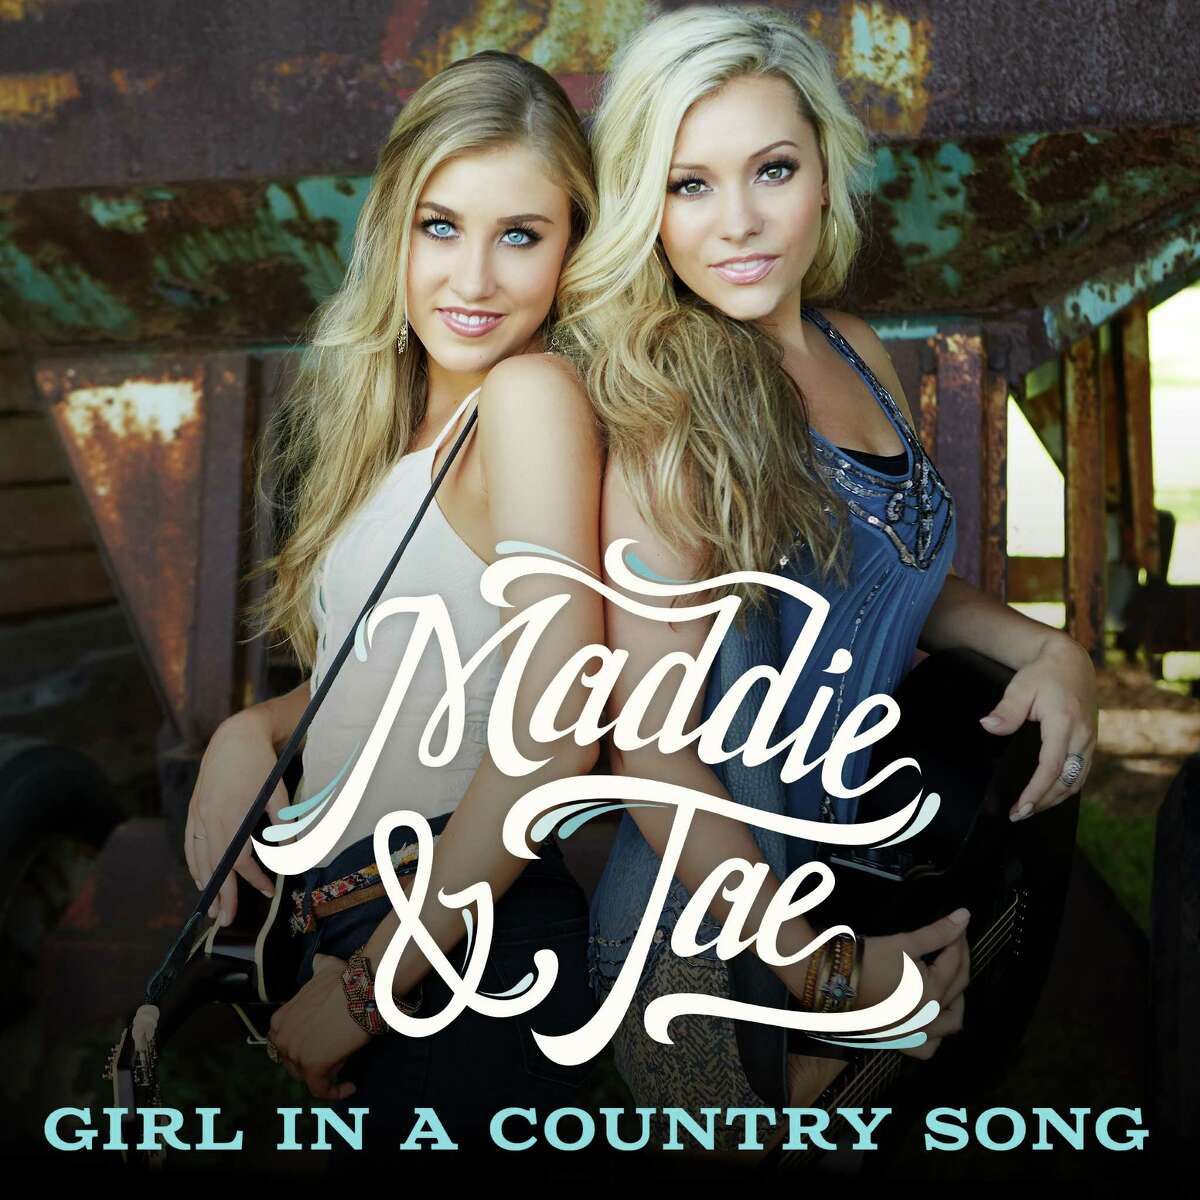 Cover art for "Girl in a Country Song" from Maddie & Tae.